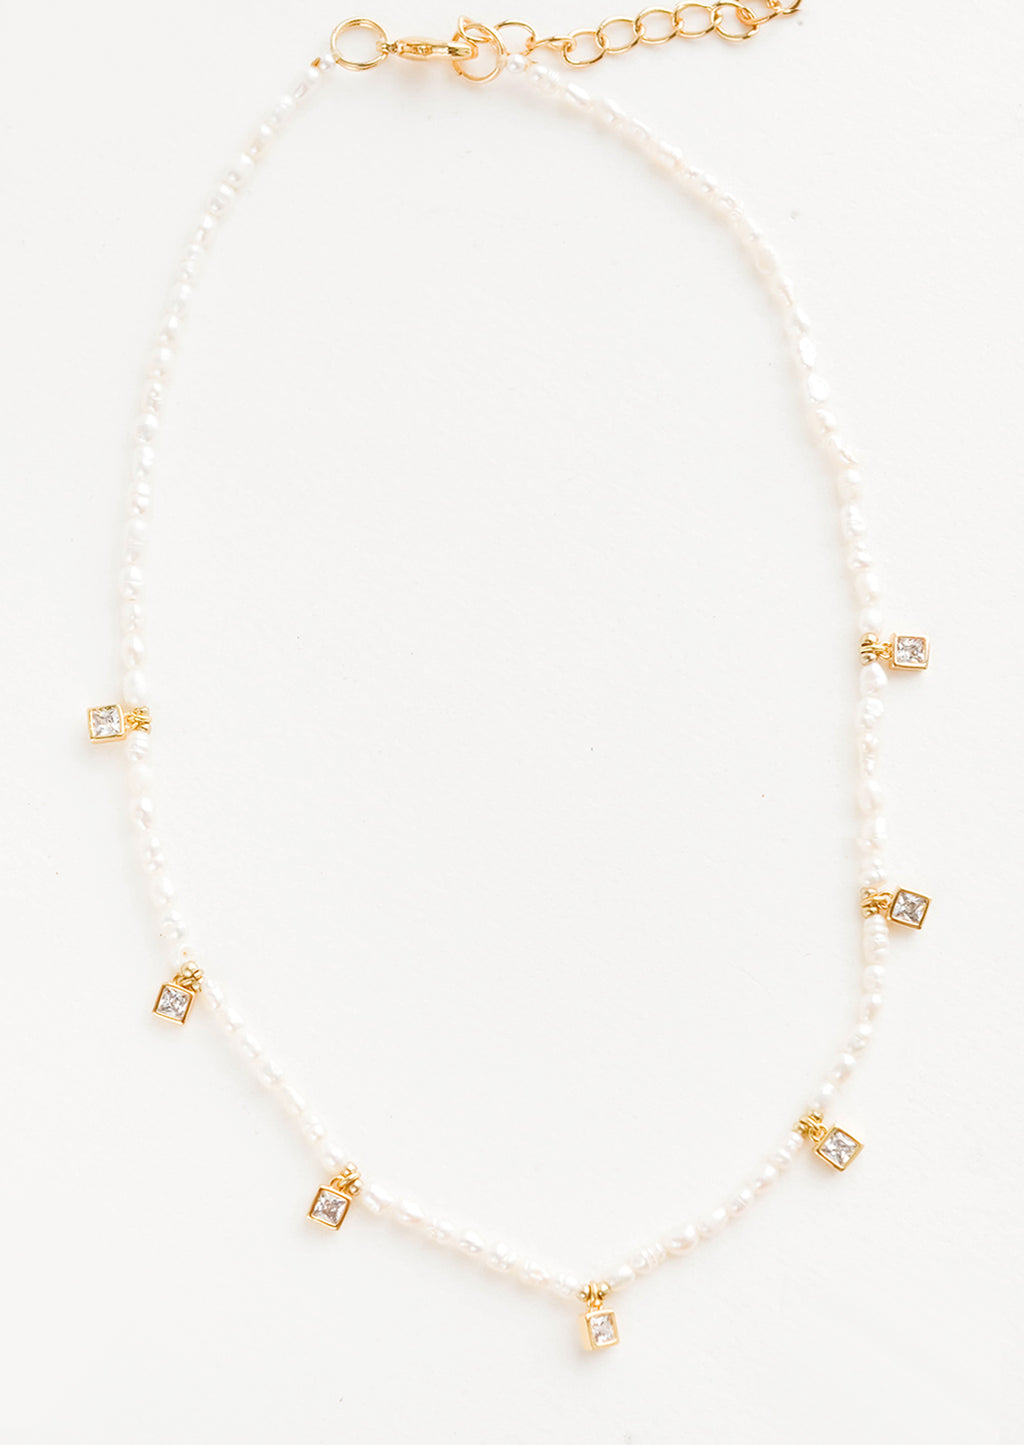 White / Gold: Pearl beaded necklace, accented with square crystal stations